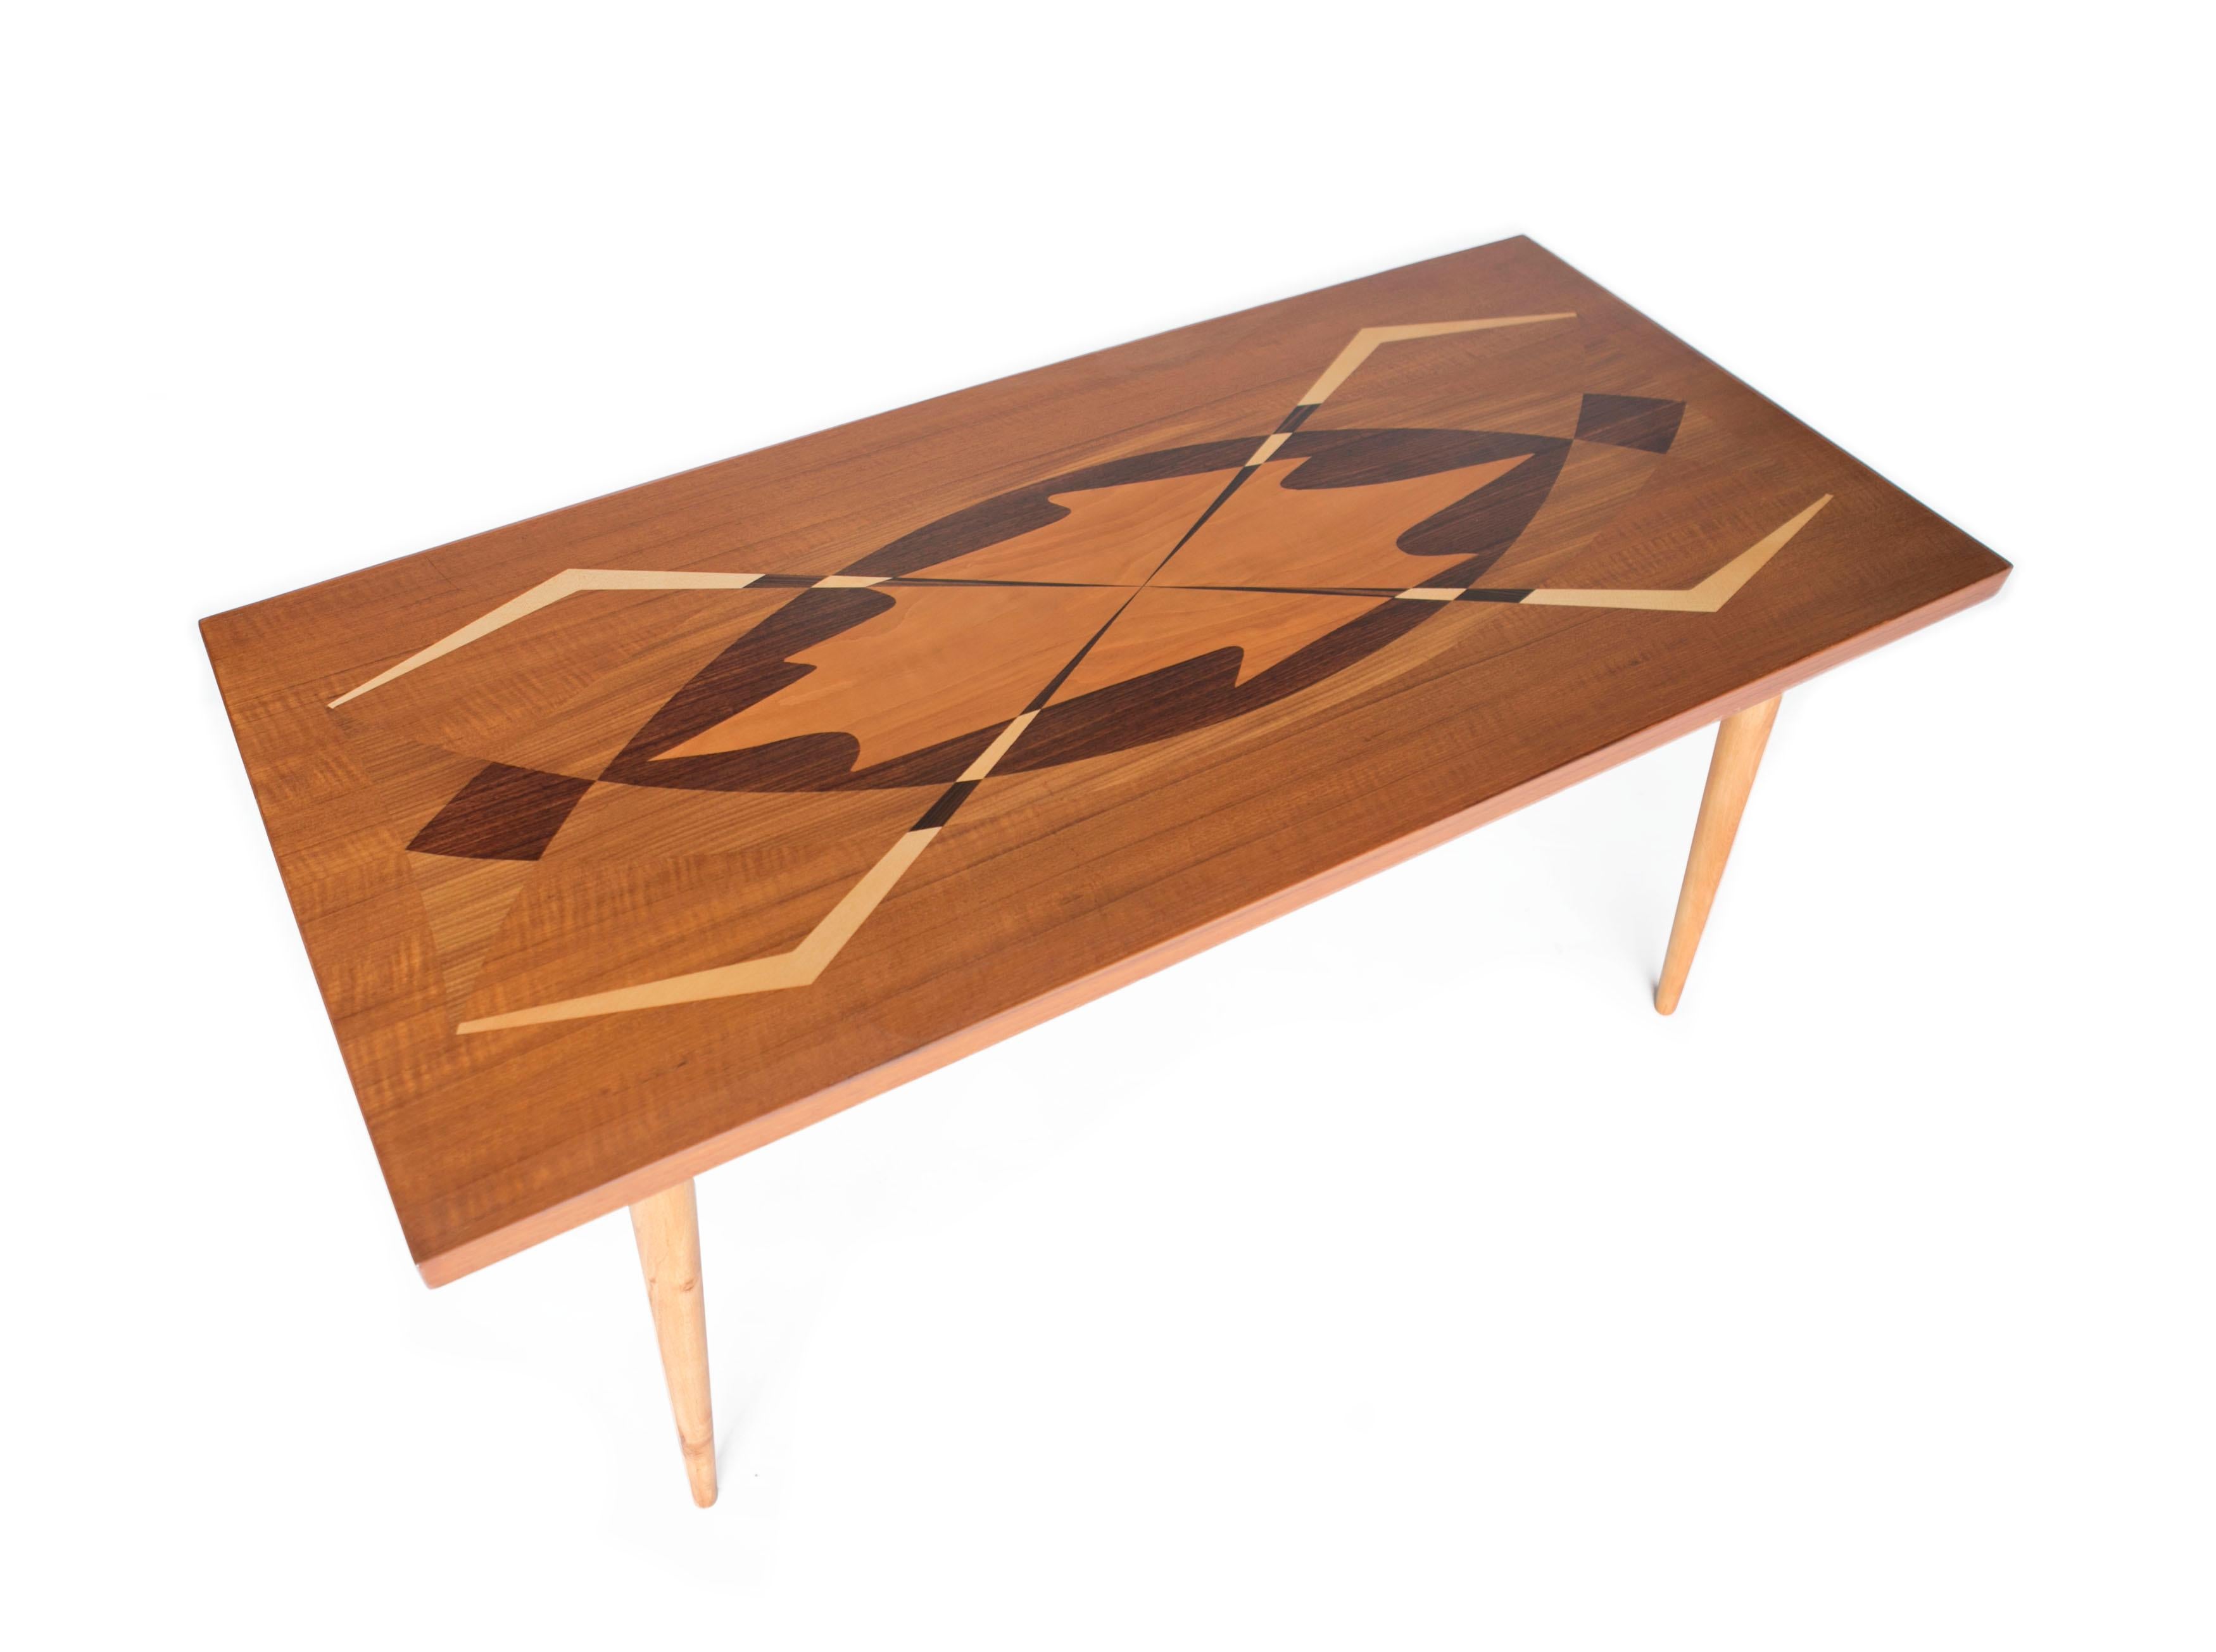 Swedish modern coffee table with exotic wood inlay, Sweden, 1950s

This is a very special Swedish coffee table with exotic inlaid wood in very midcentury graphical patterns. Maker is unknown but likely made in Tranås Sweden who were well known for